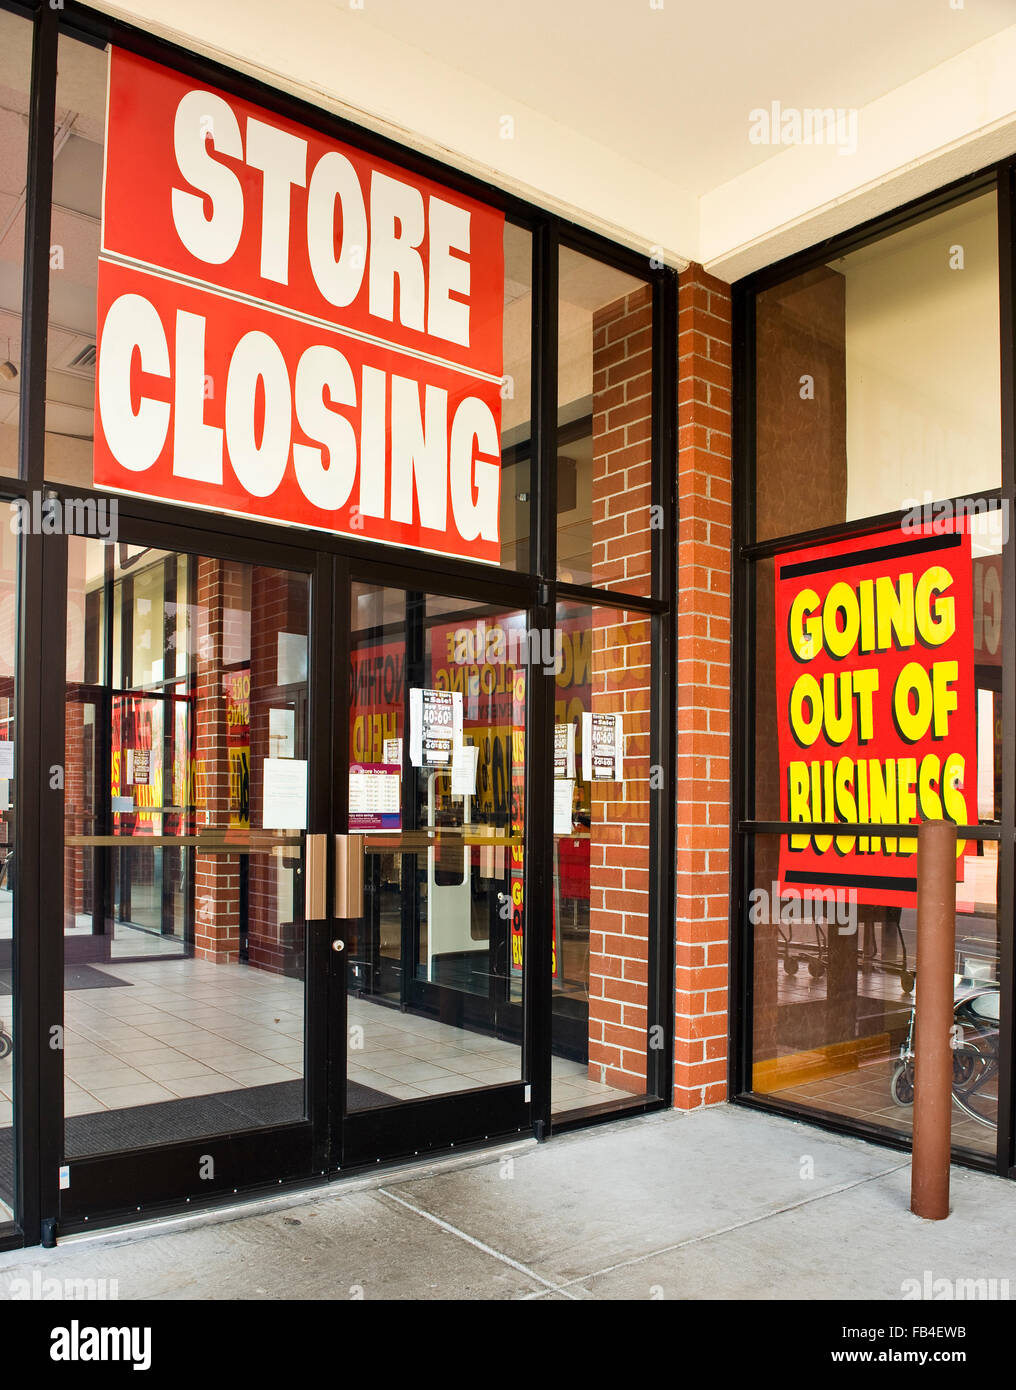 Retail Store Going Out of Business Stock Photo Alamy